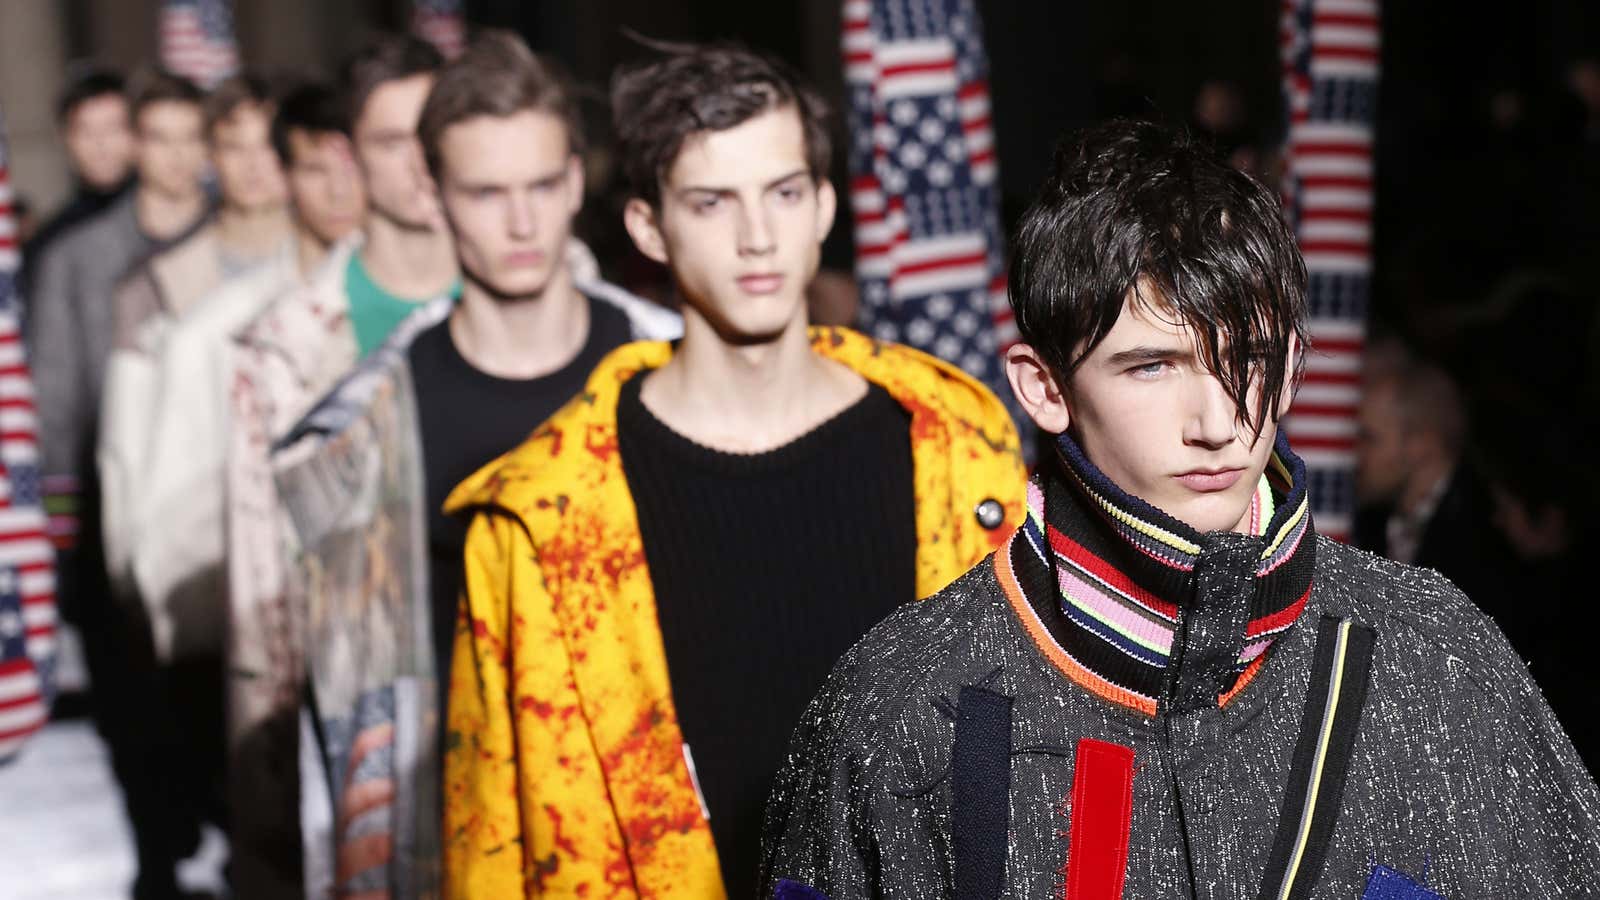 Forget Abercrombie. More young guys are now lusting over brands like Raf Simons.